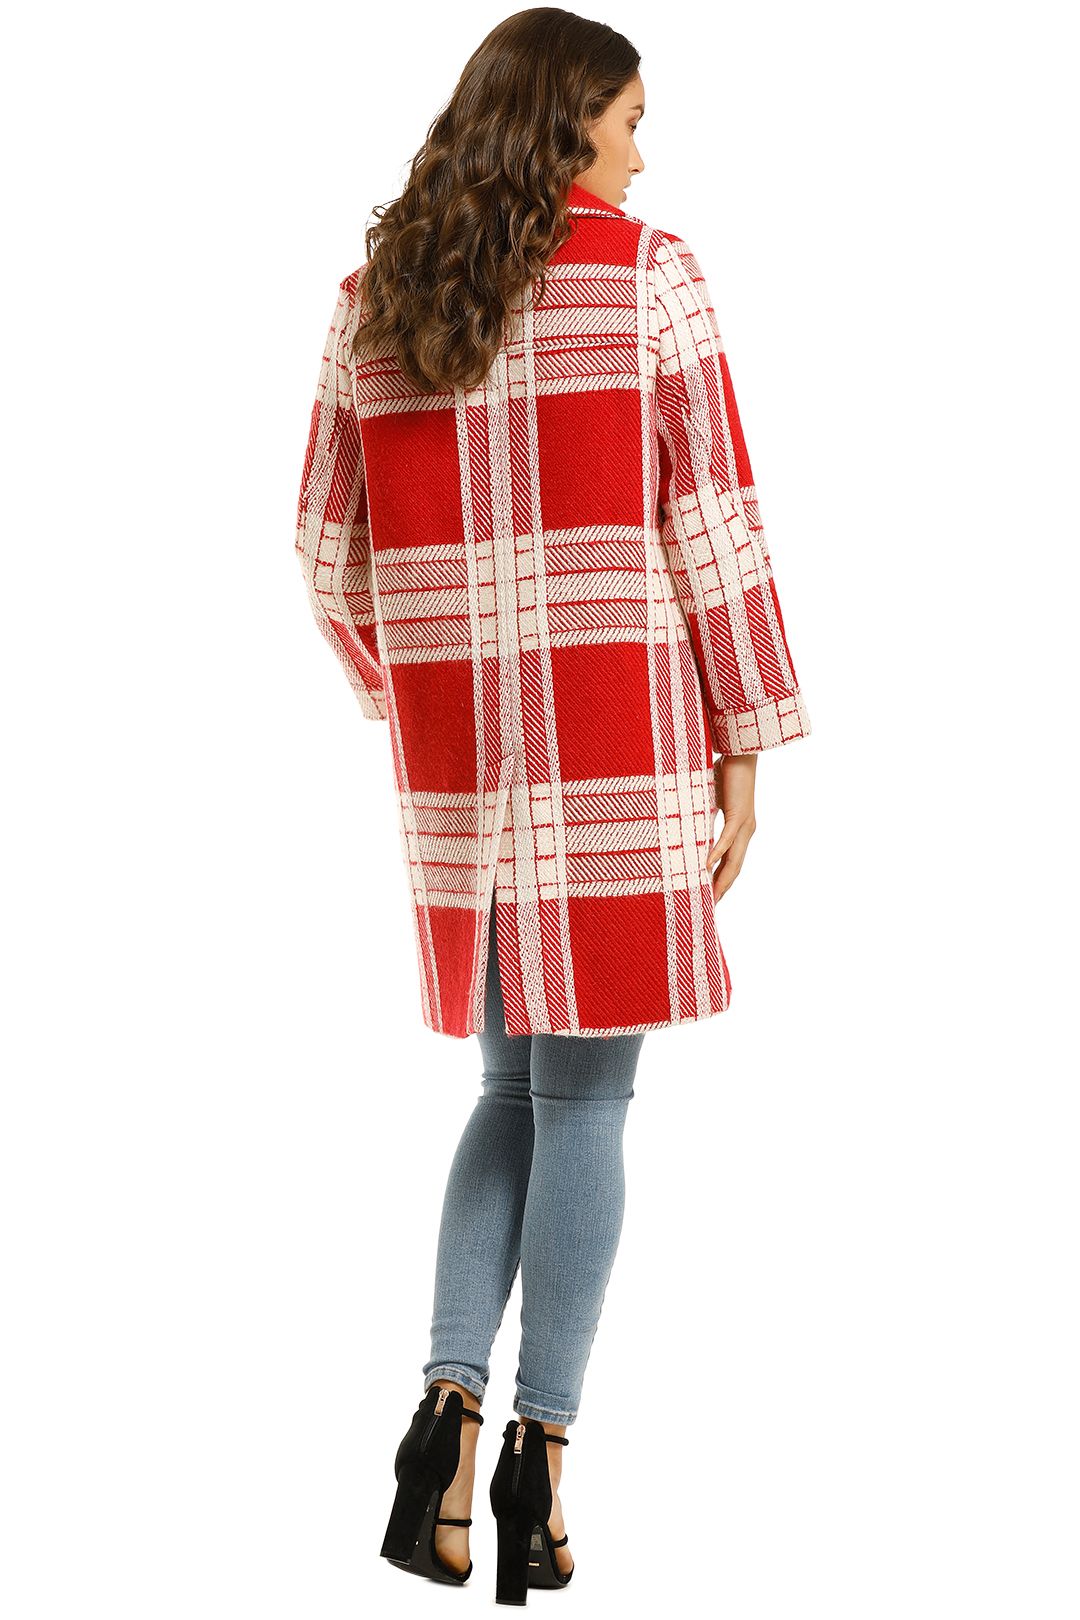 Coop-by-Trelise-Cooper-Rock-The-Coat-Red-Plaid-Back